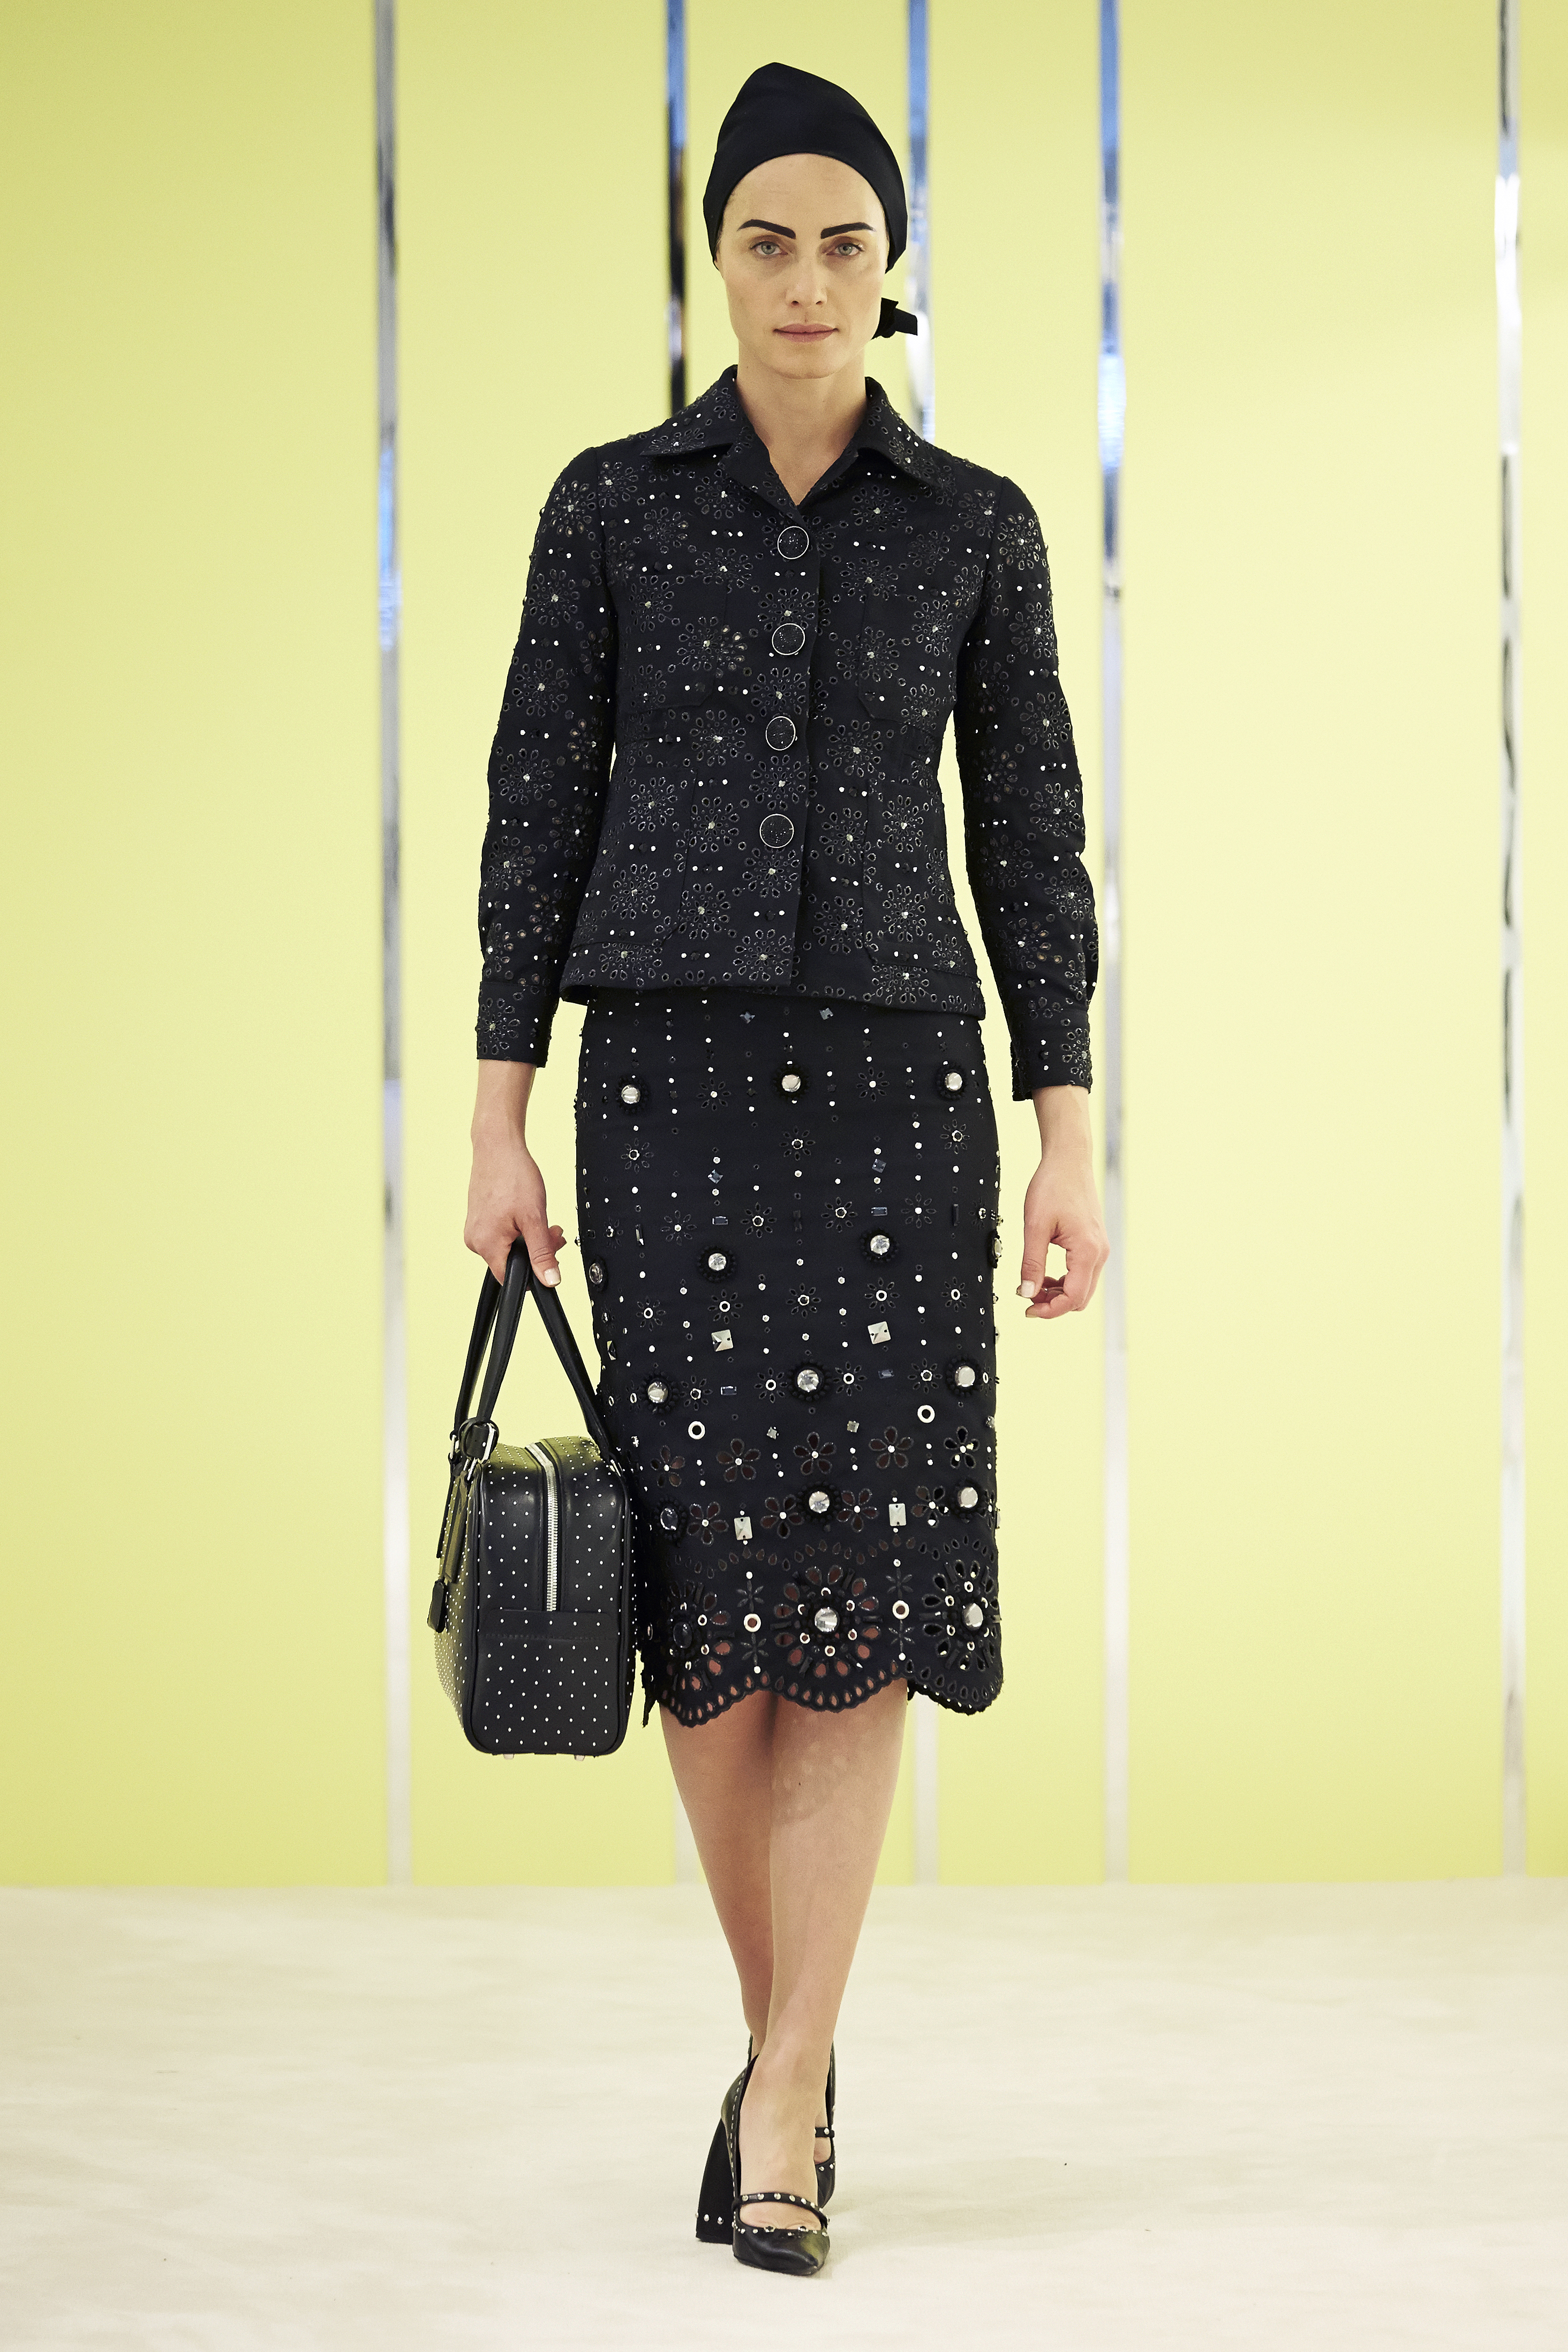 MARC JACOBS RESORT 2016 COLLECTION NEW YORK